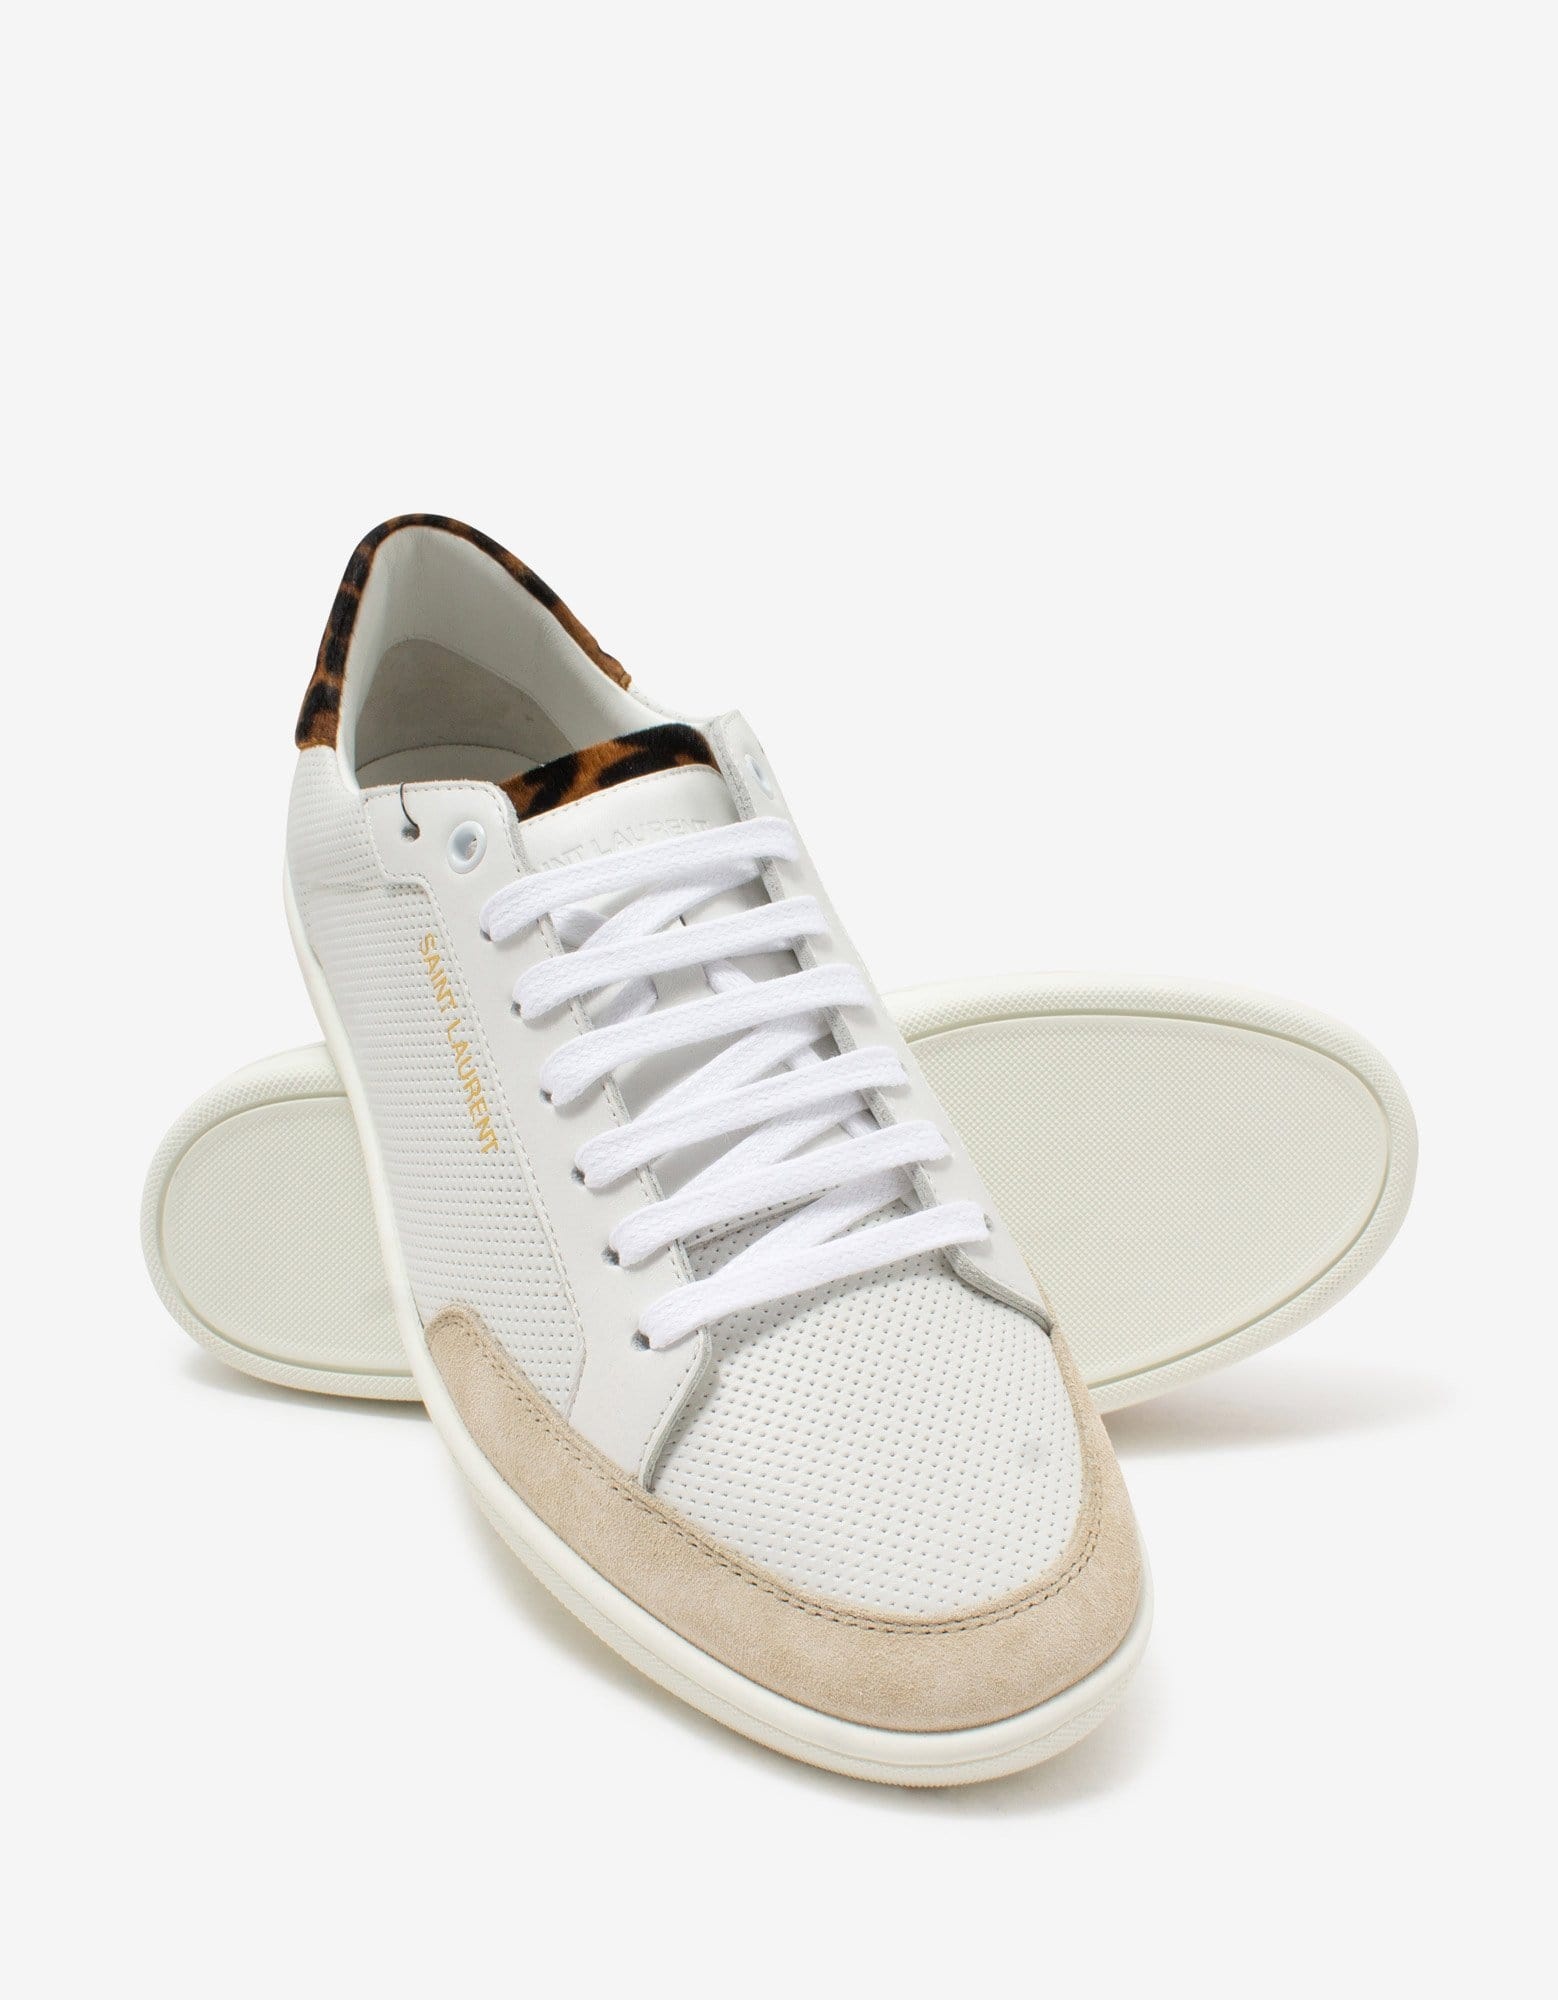 Court Classic SL/10 White Perforated Leather Trainers - 7